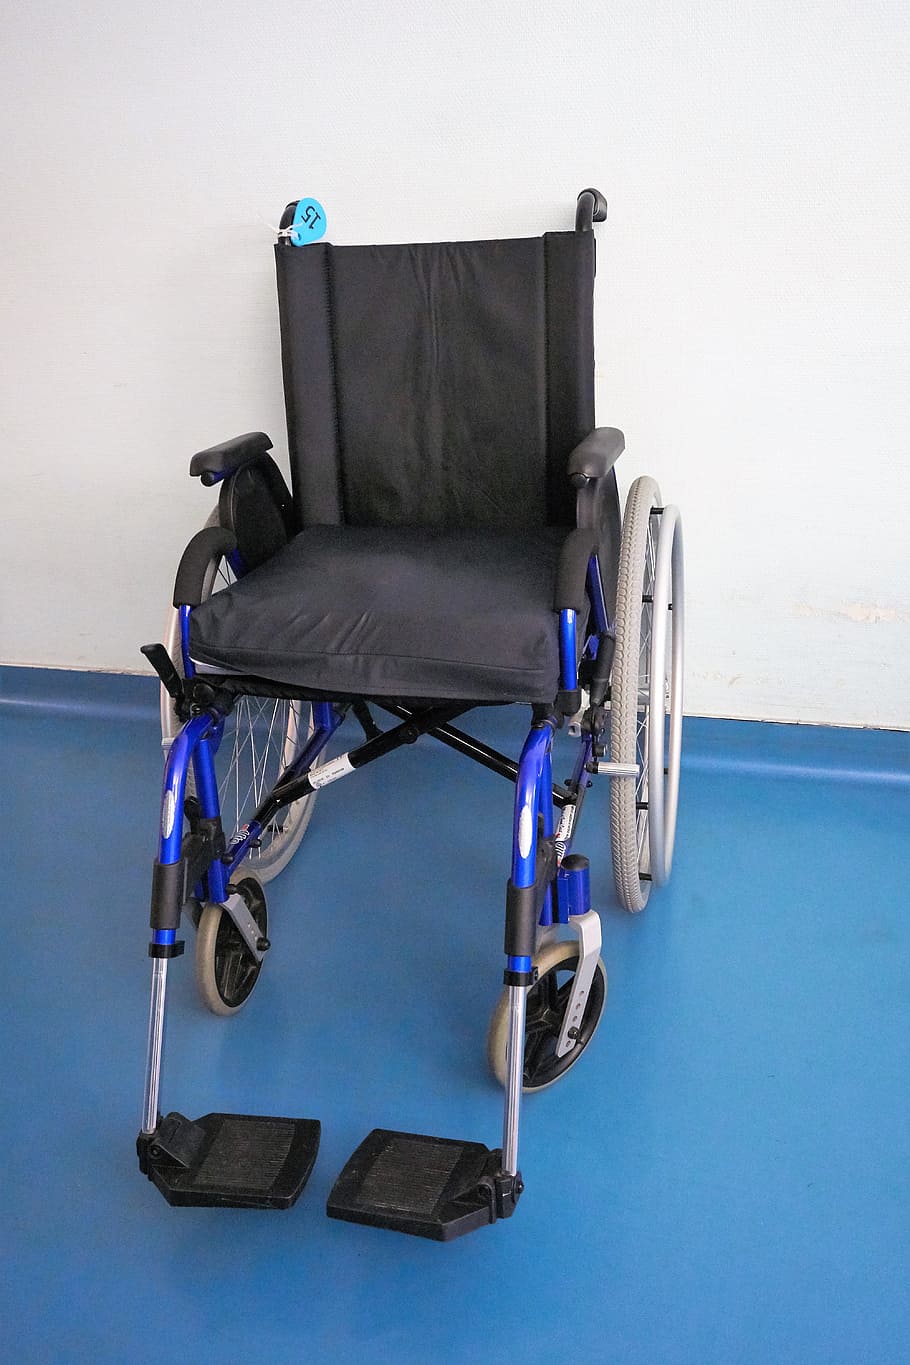 Wheelchair, Medical, Health, medical world, transportation, autonomy, handicap, disabled, reduced mobility, disability